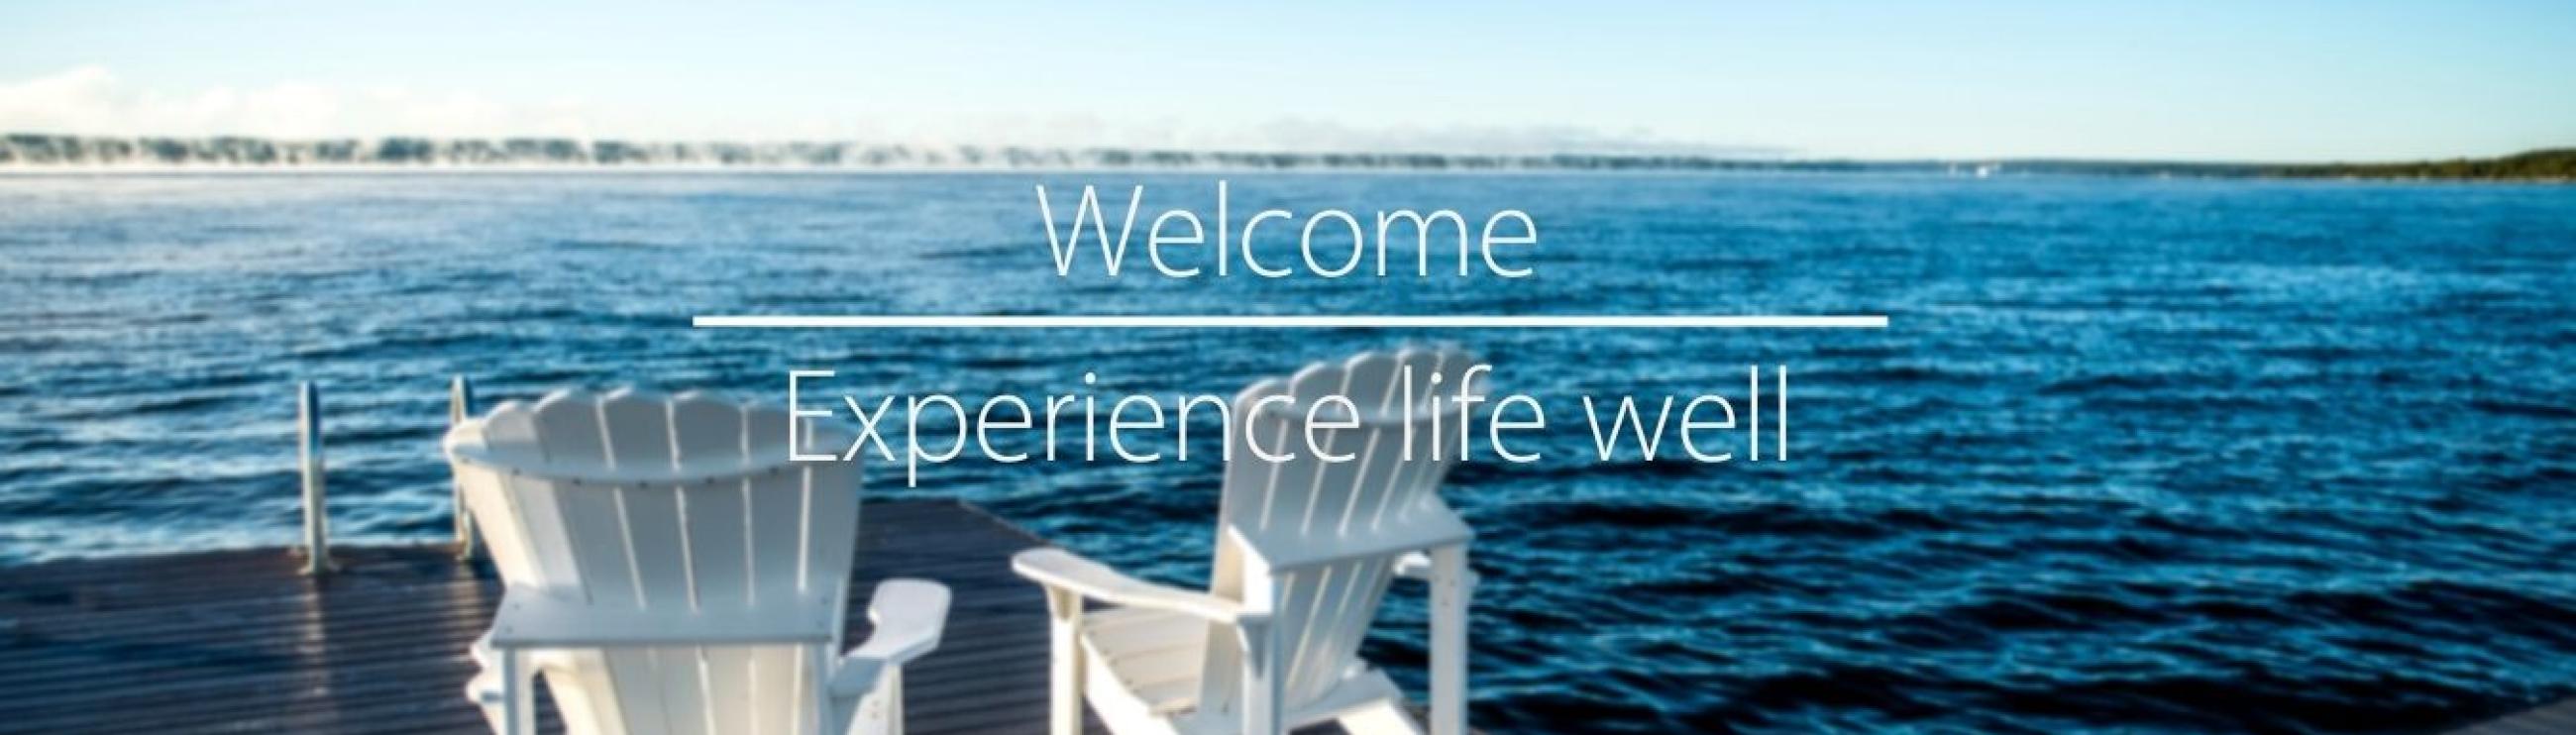 Website Banners experience life well-7.jpg